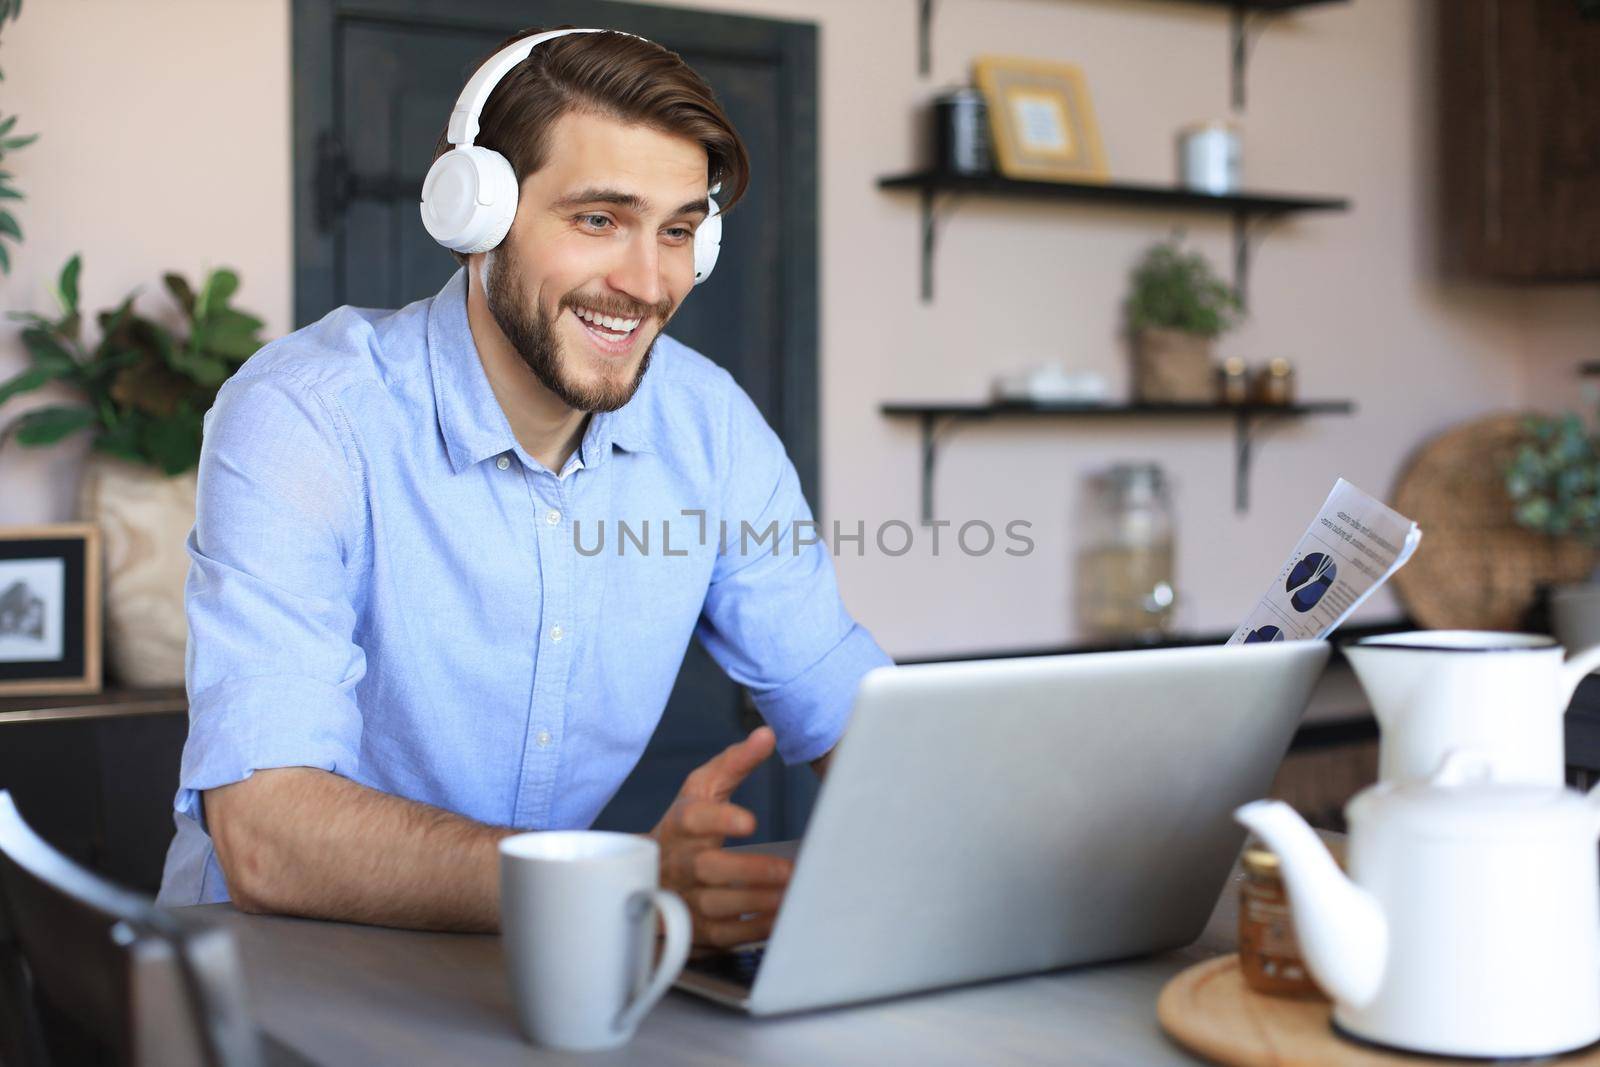 Smiling businessman greeting colleagues in video conference and negotiating distantly from home